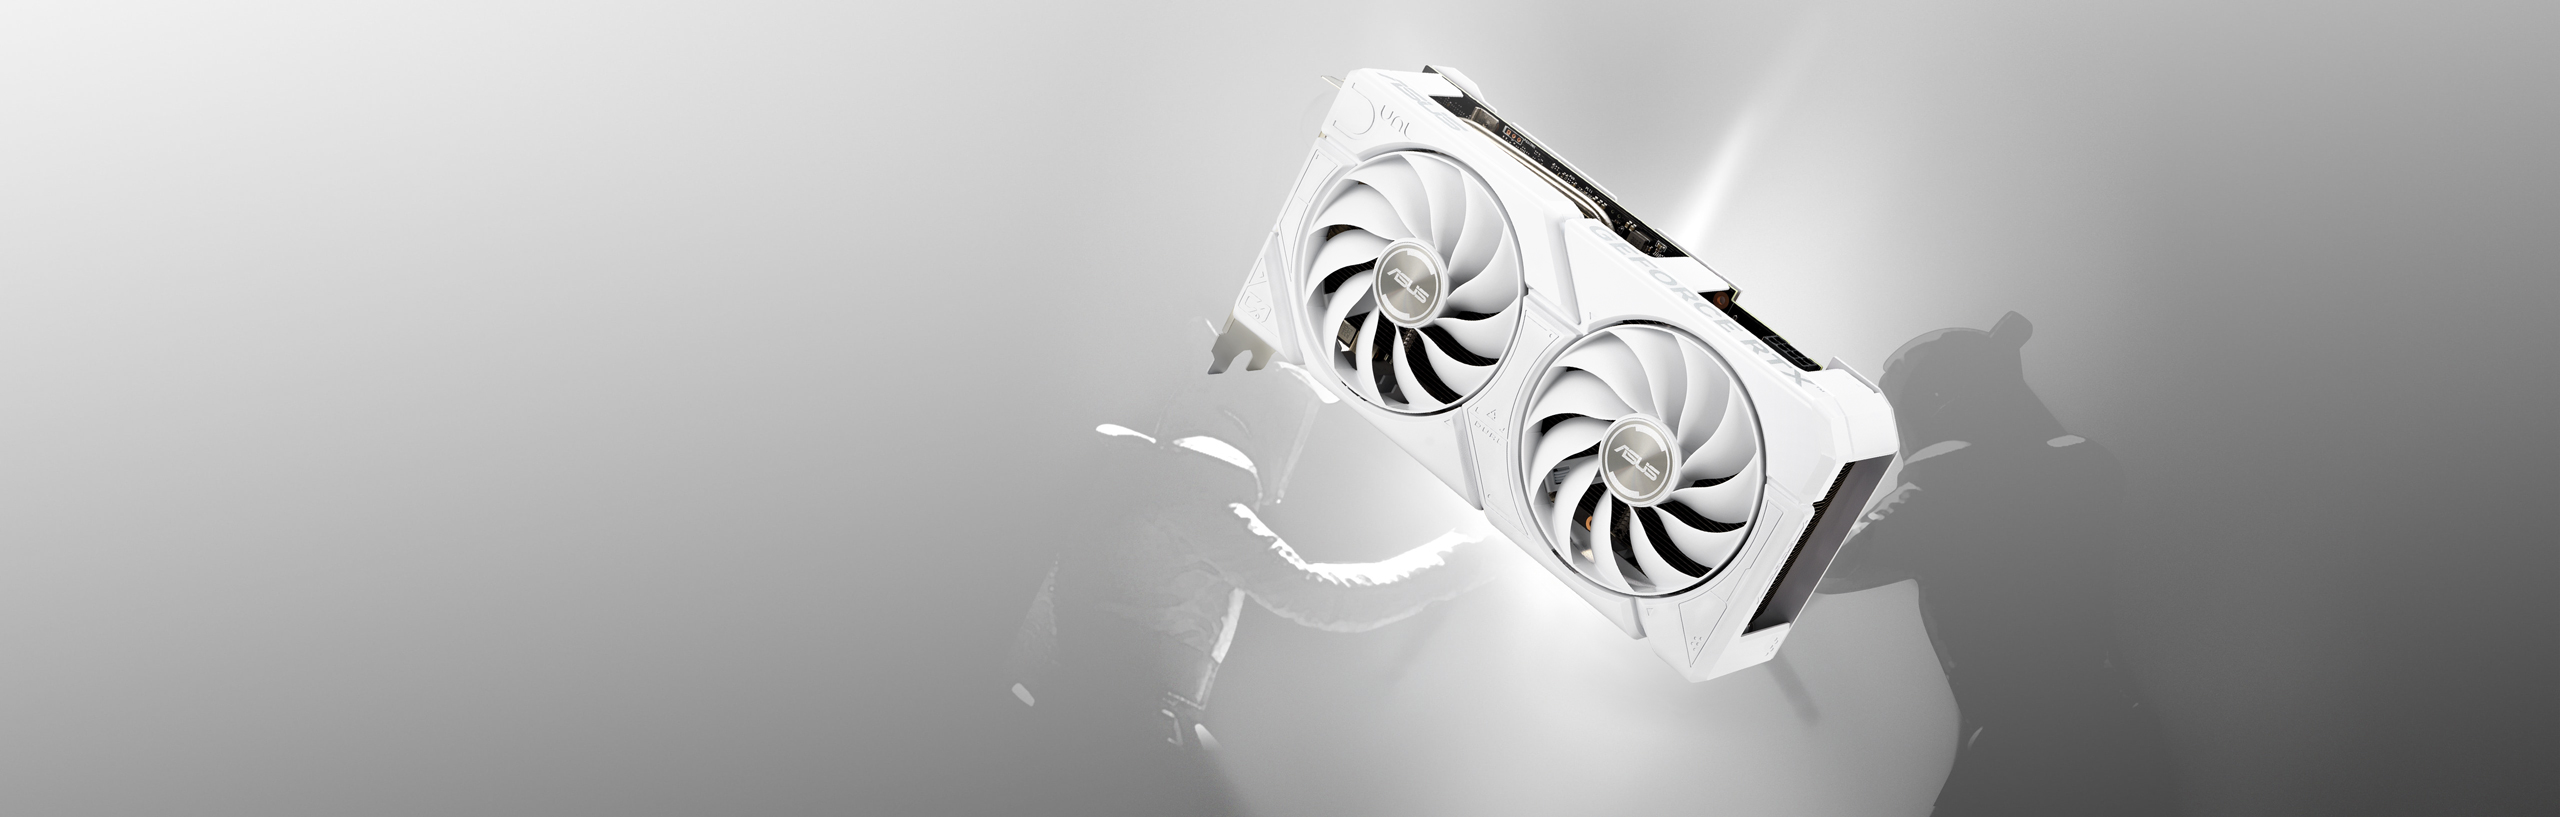 Front view of the ASUS Dual GeForce RTX™ 4070 SUPER White Edition graphics card with two men fighting in the background.  